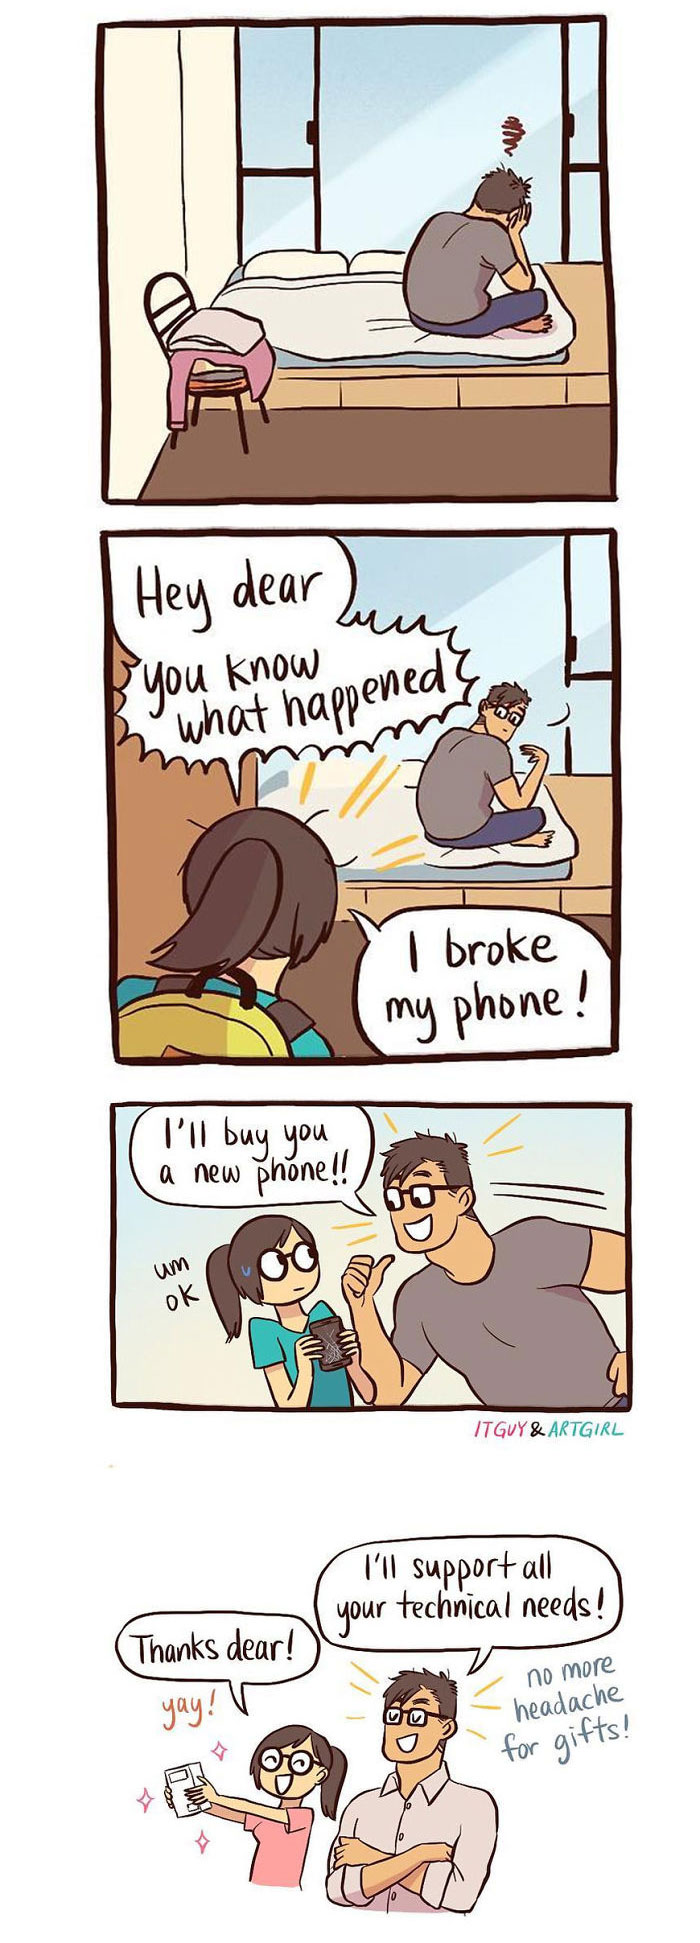 Artist Illustrates Her Relationship With ‘IT Guy’ In 21 Adorable Comics (New Pics)